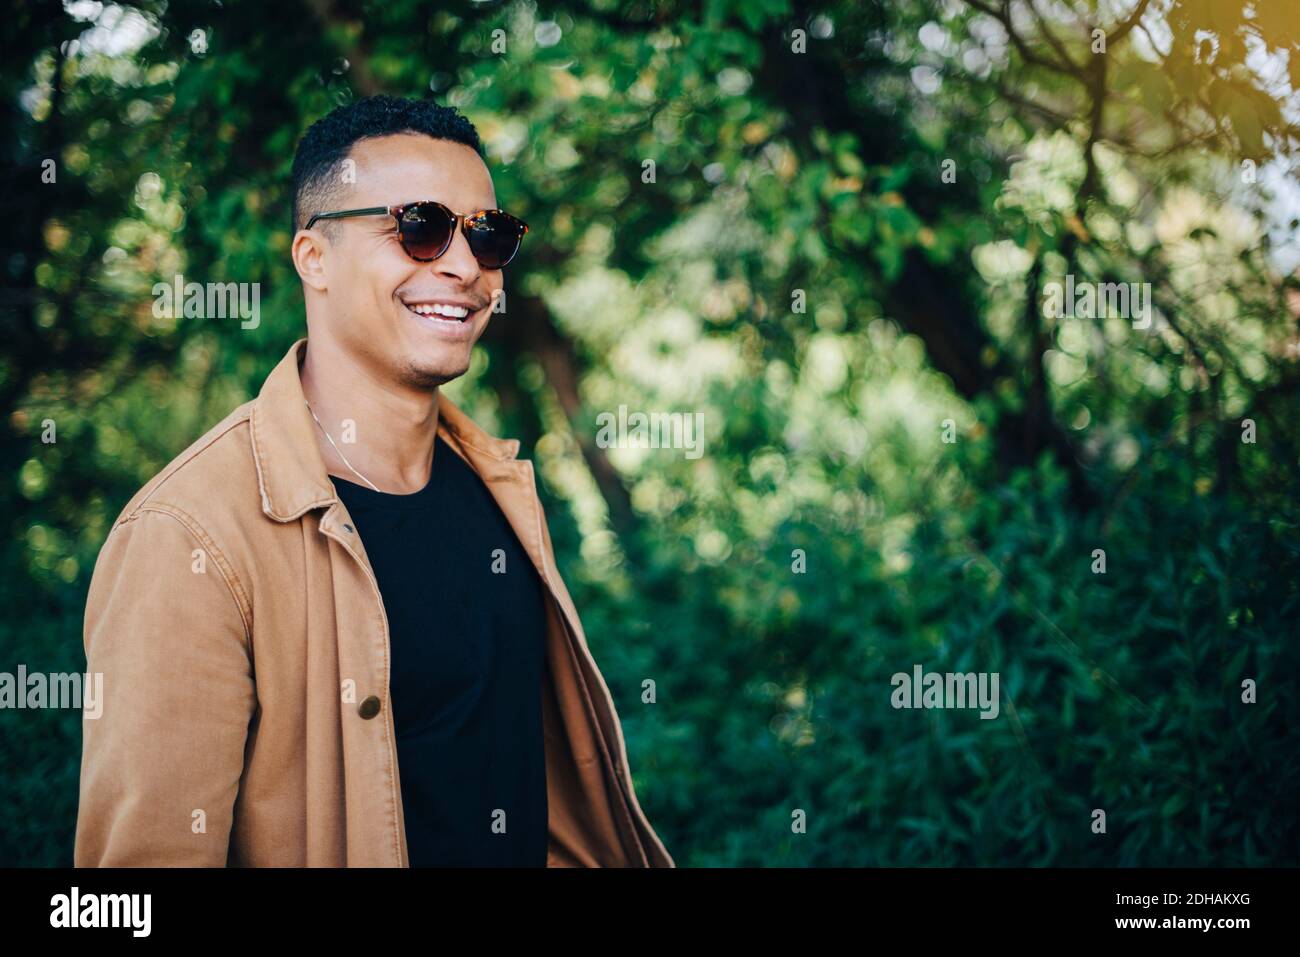 Close-up of smiling man wearing brown jacket standing by plants Stock Photo